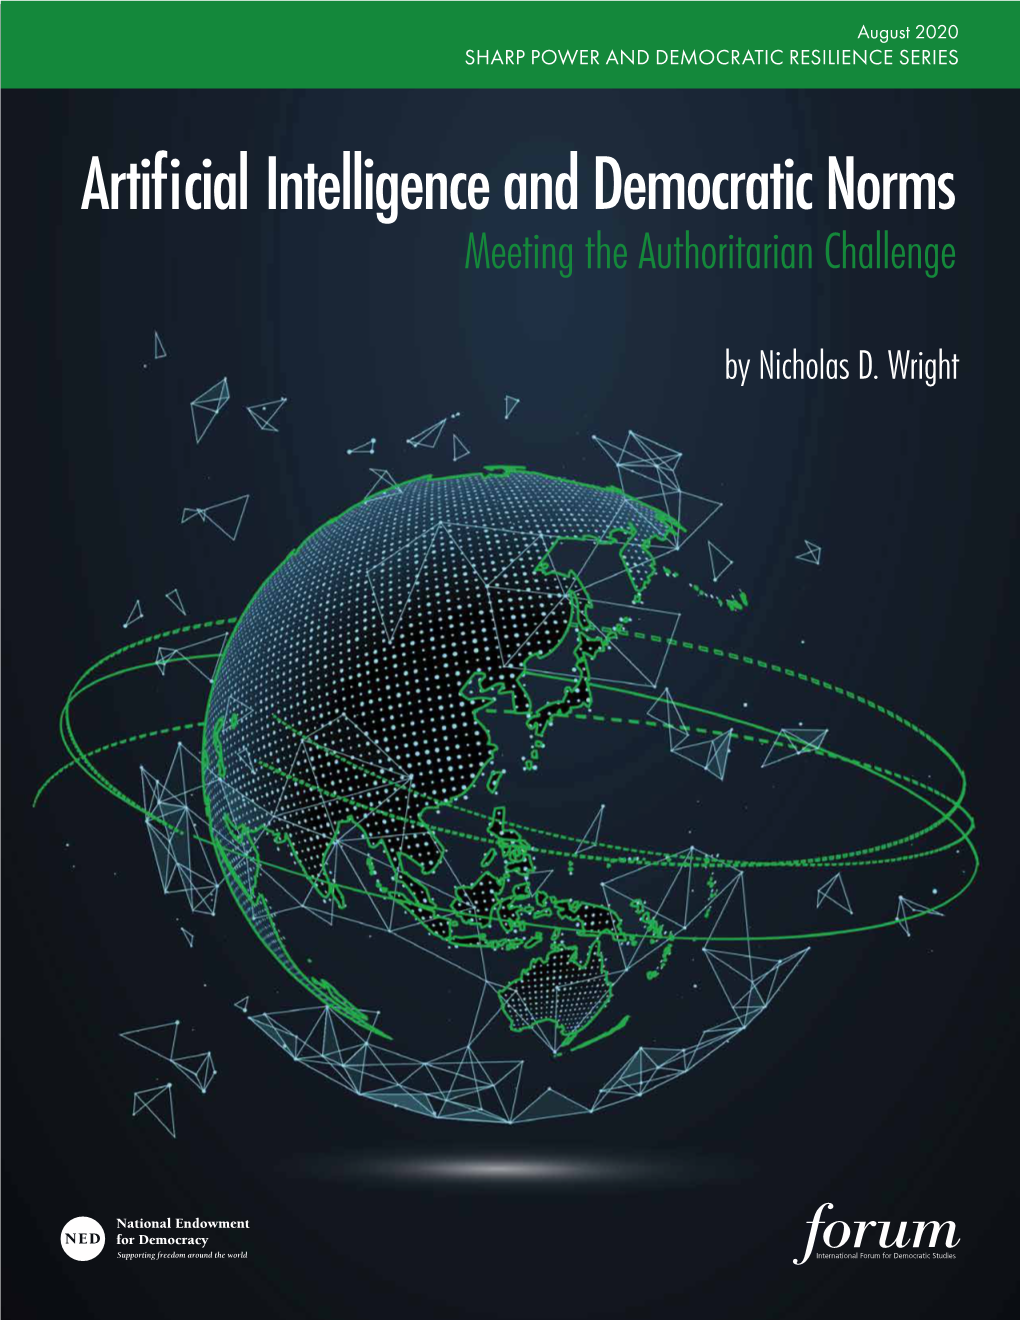 Artificial Intelligence and Democratic Norms: Meeting the Authoritarian Challenge